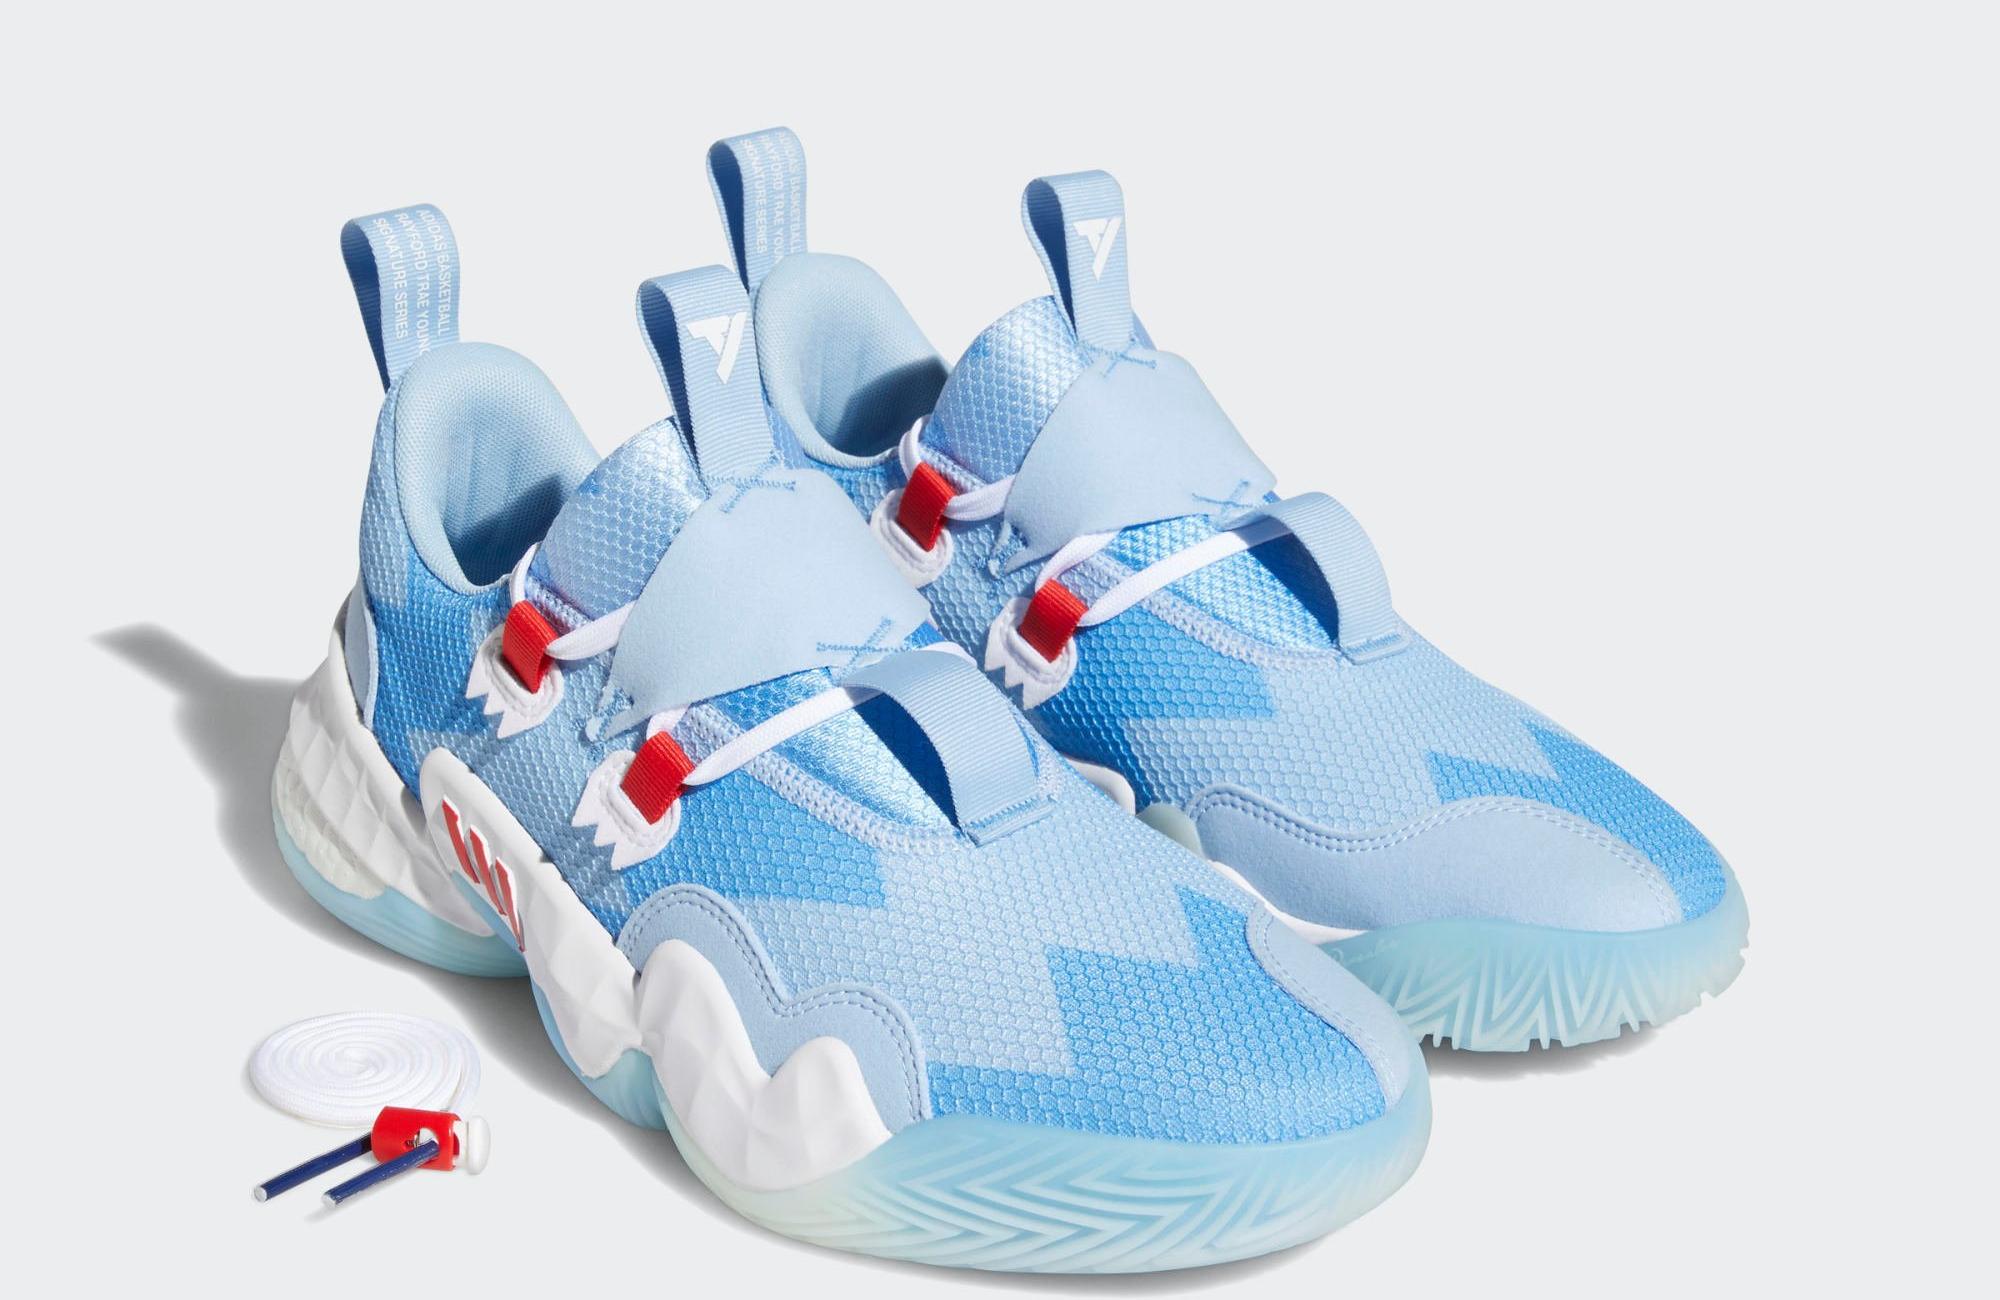 Sneakers Release – adidas Trae Young 1 “ICEE” Men’s Basketball Shoe ...